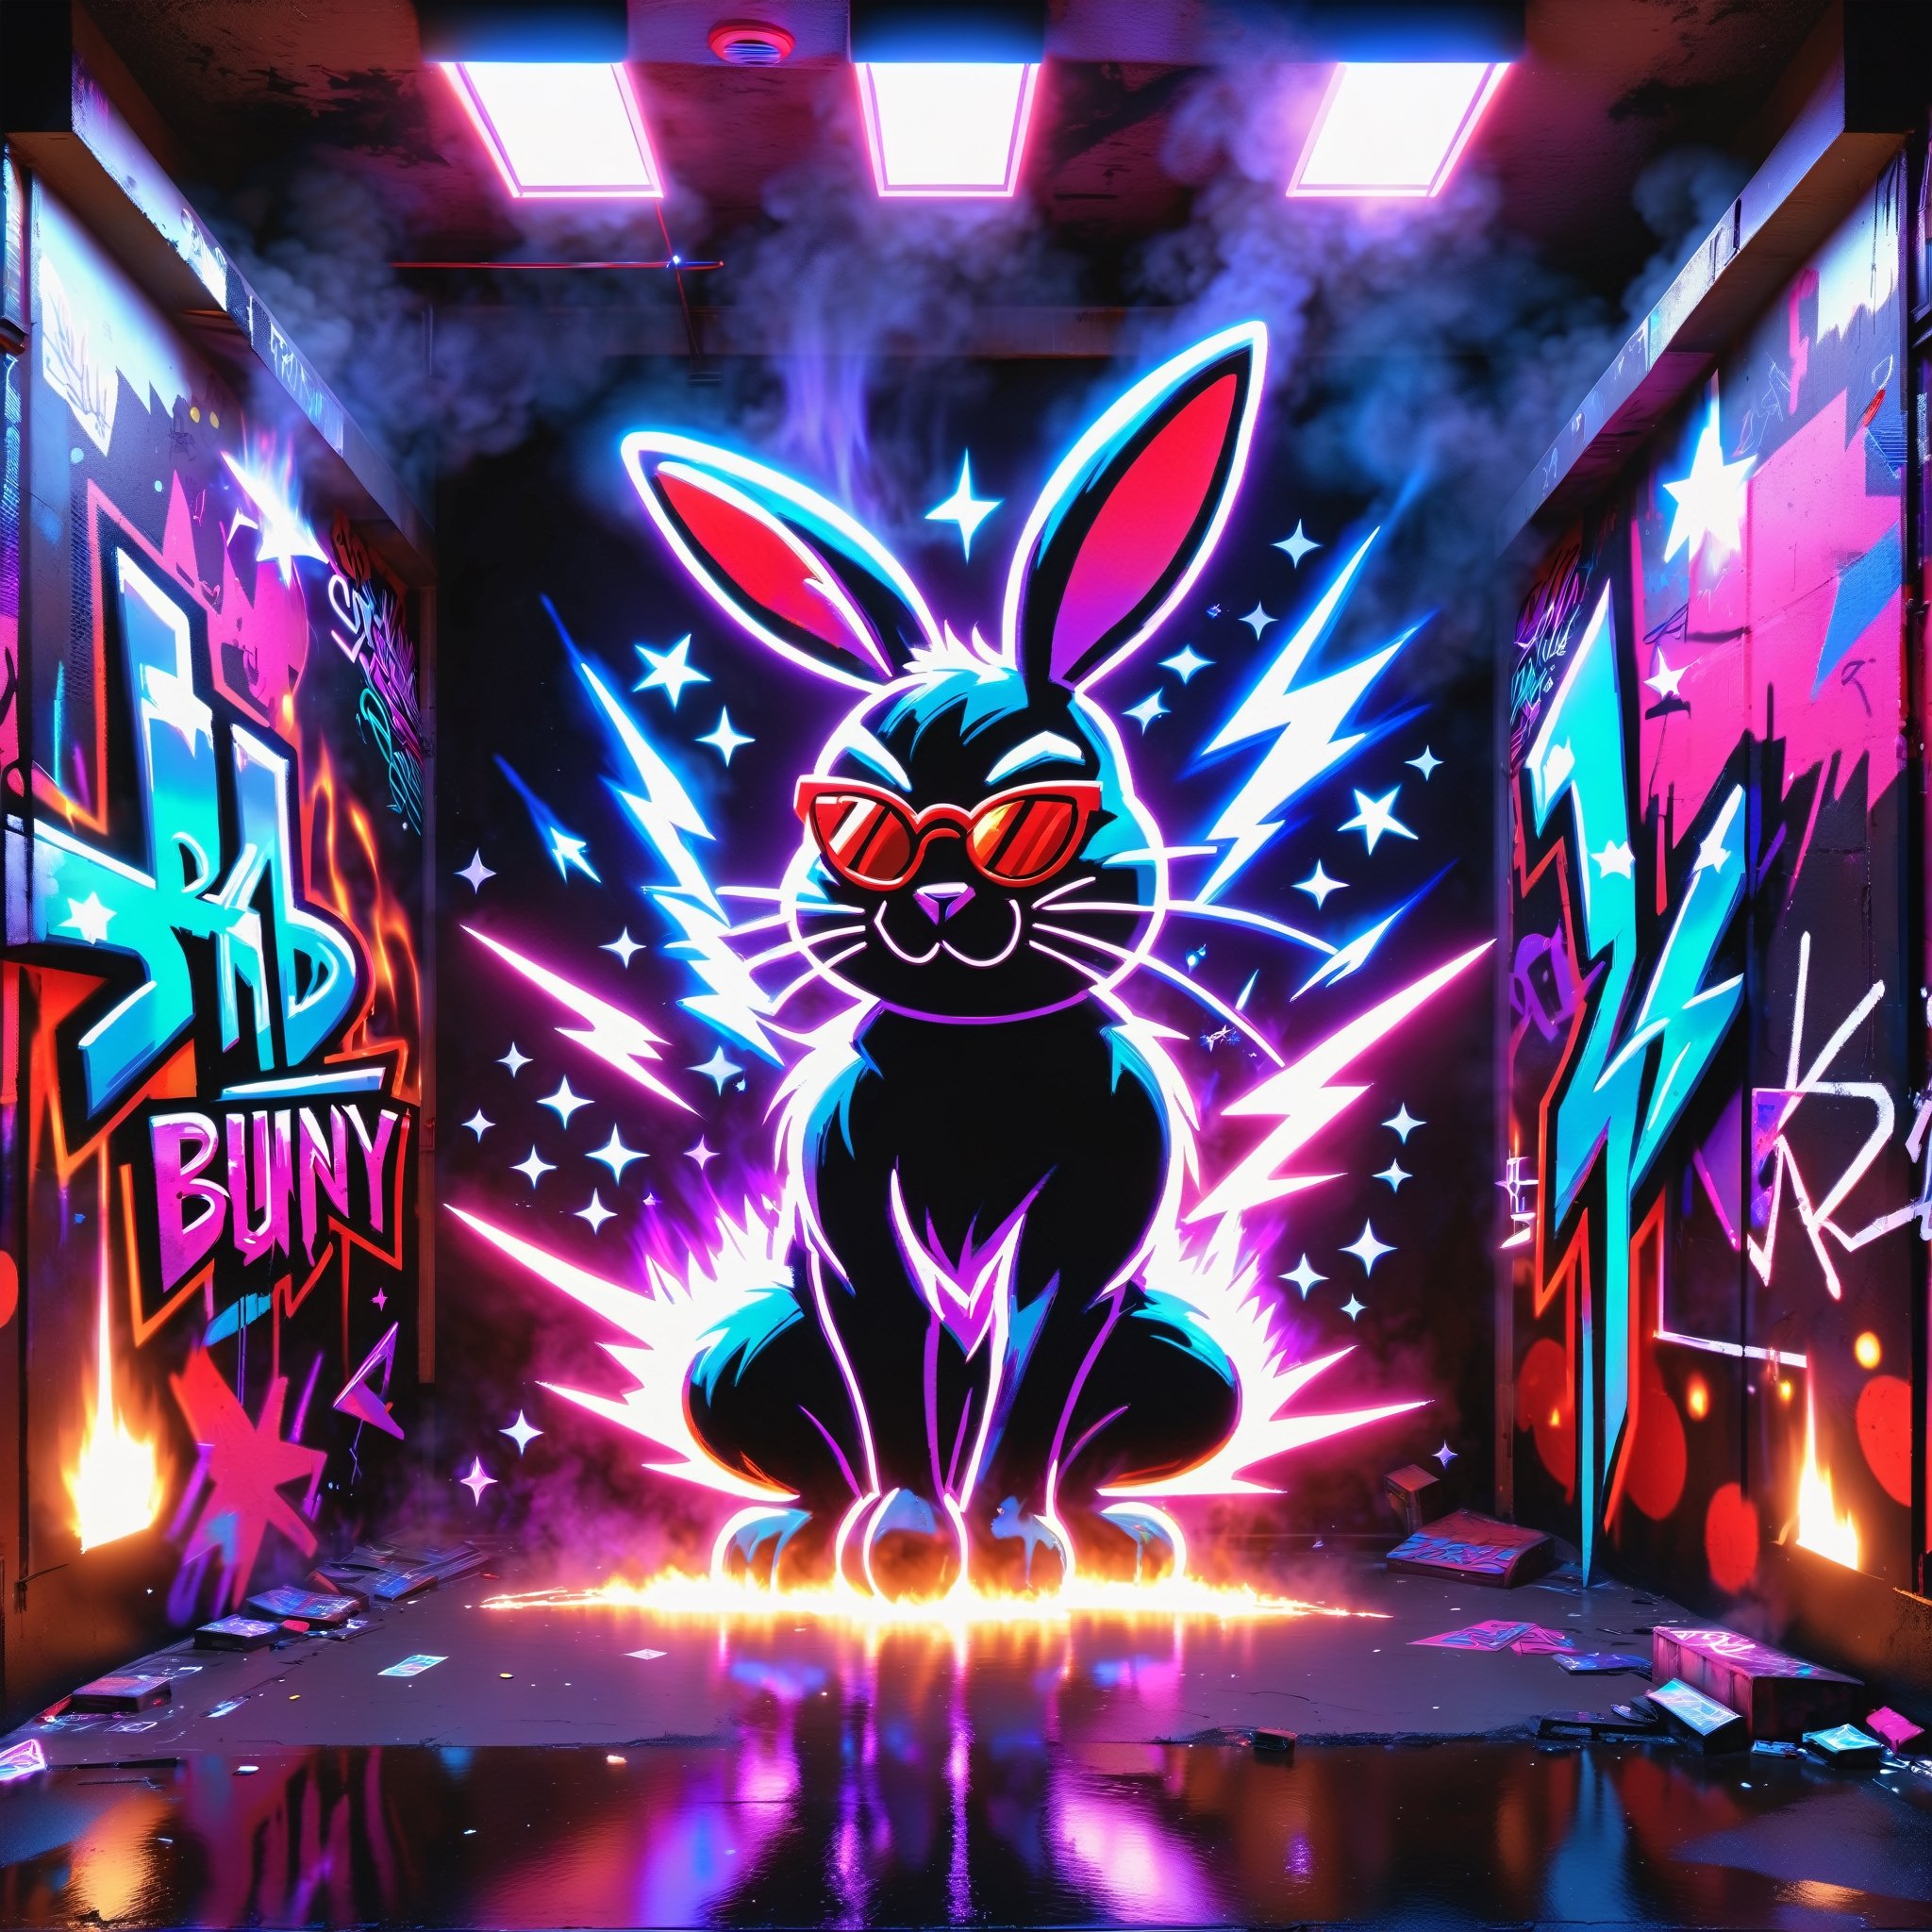 "Bad Bunny" in neon red, black, metallic, purple, blue, Pink, neon, sparkles, Neon colored smoke, planet, graffiti background,
,composed of elements of street art Fire thunder Lightning Electricity Space stars and neon lights atomic explosions, Cyberpunk,DonMH010D15pl4yXL 